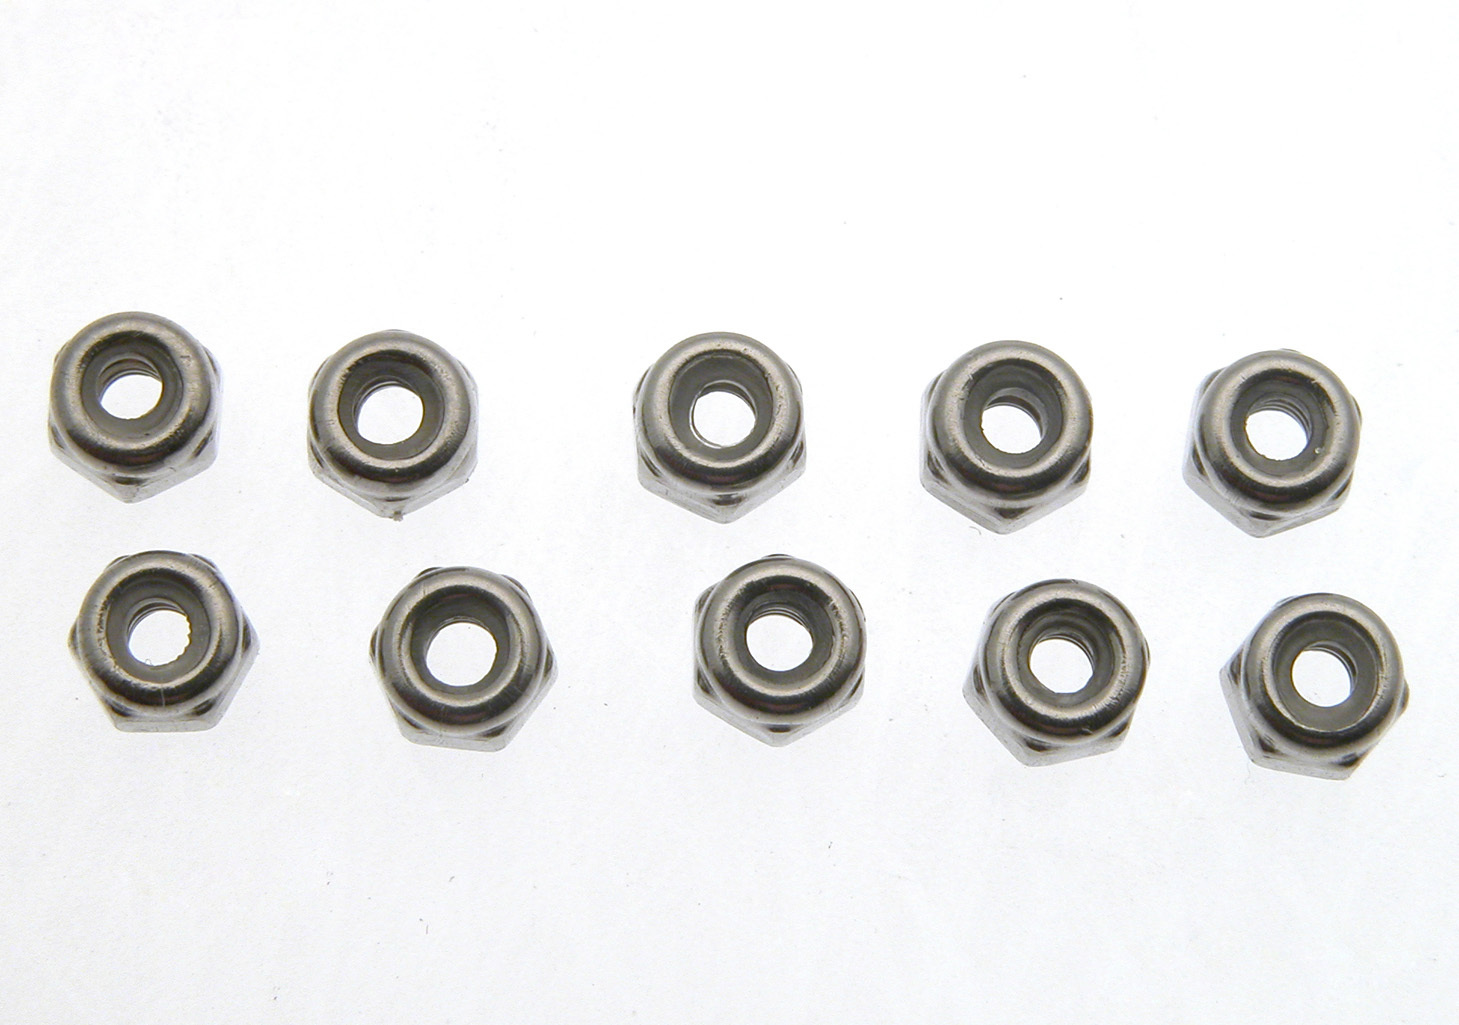 Details about   Pro Slot PS-642 Hardware Set Complete w/ oilite spring cup & screws 